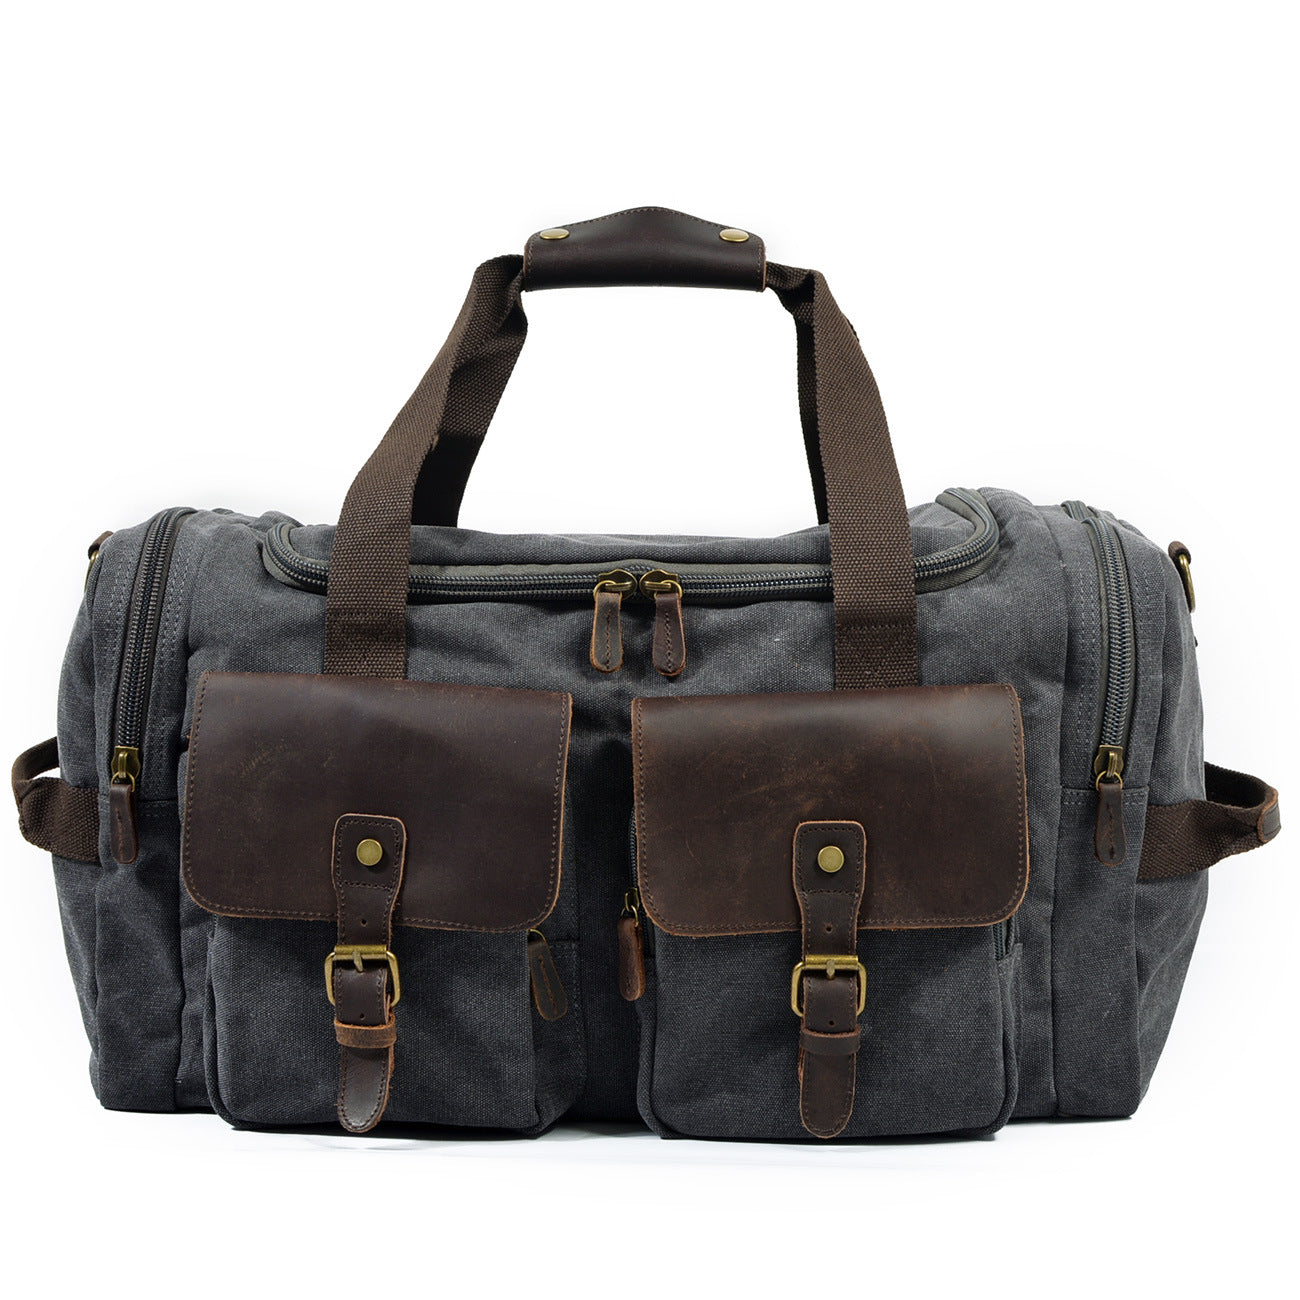 Casual Men's Large Storage Leather Canvas Traveling Duffle Bags 9133-Leather Canvas Duffle Bag-Dark Gray-Free Shipping Leatheretro